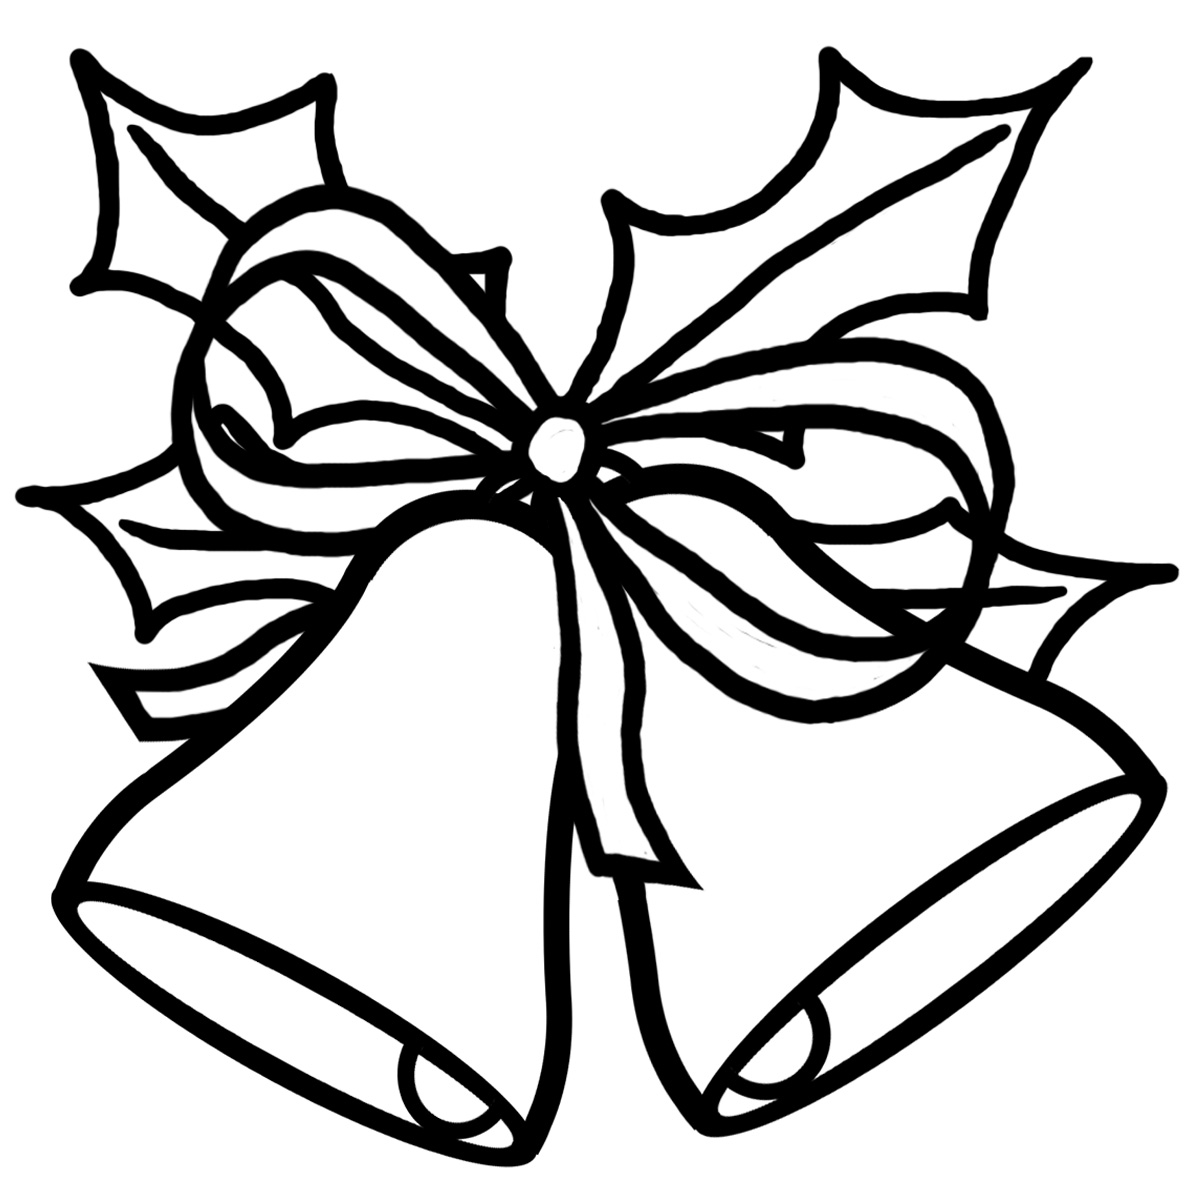 Christmas holiday clipart black and white - ClipartFox